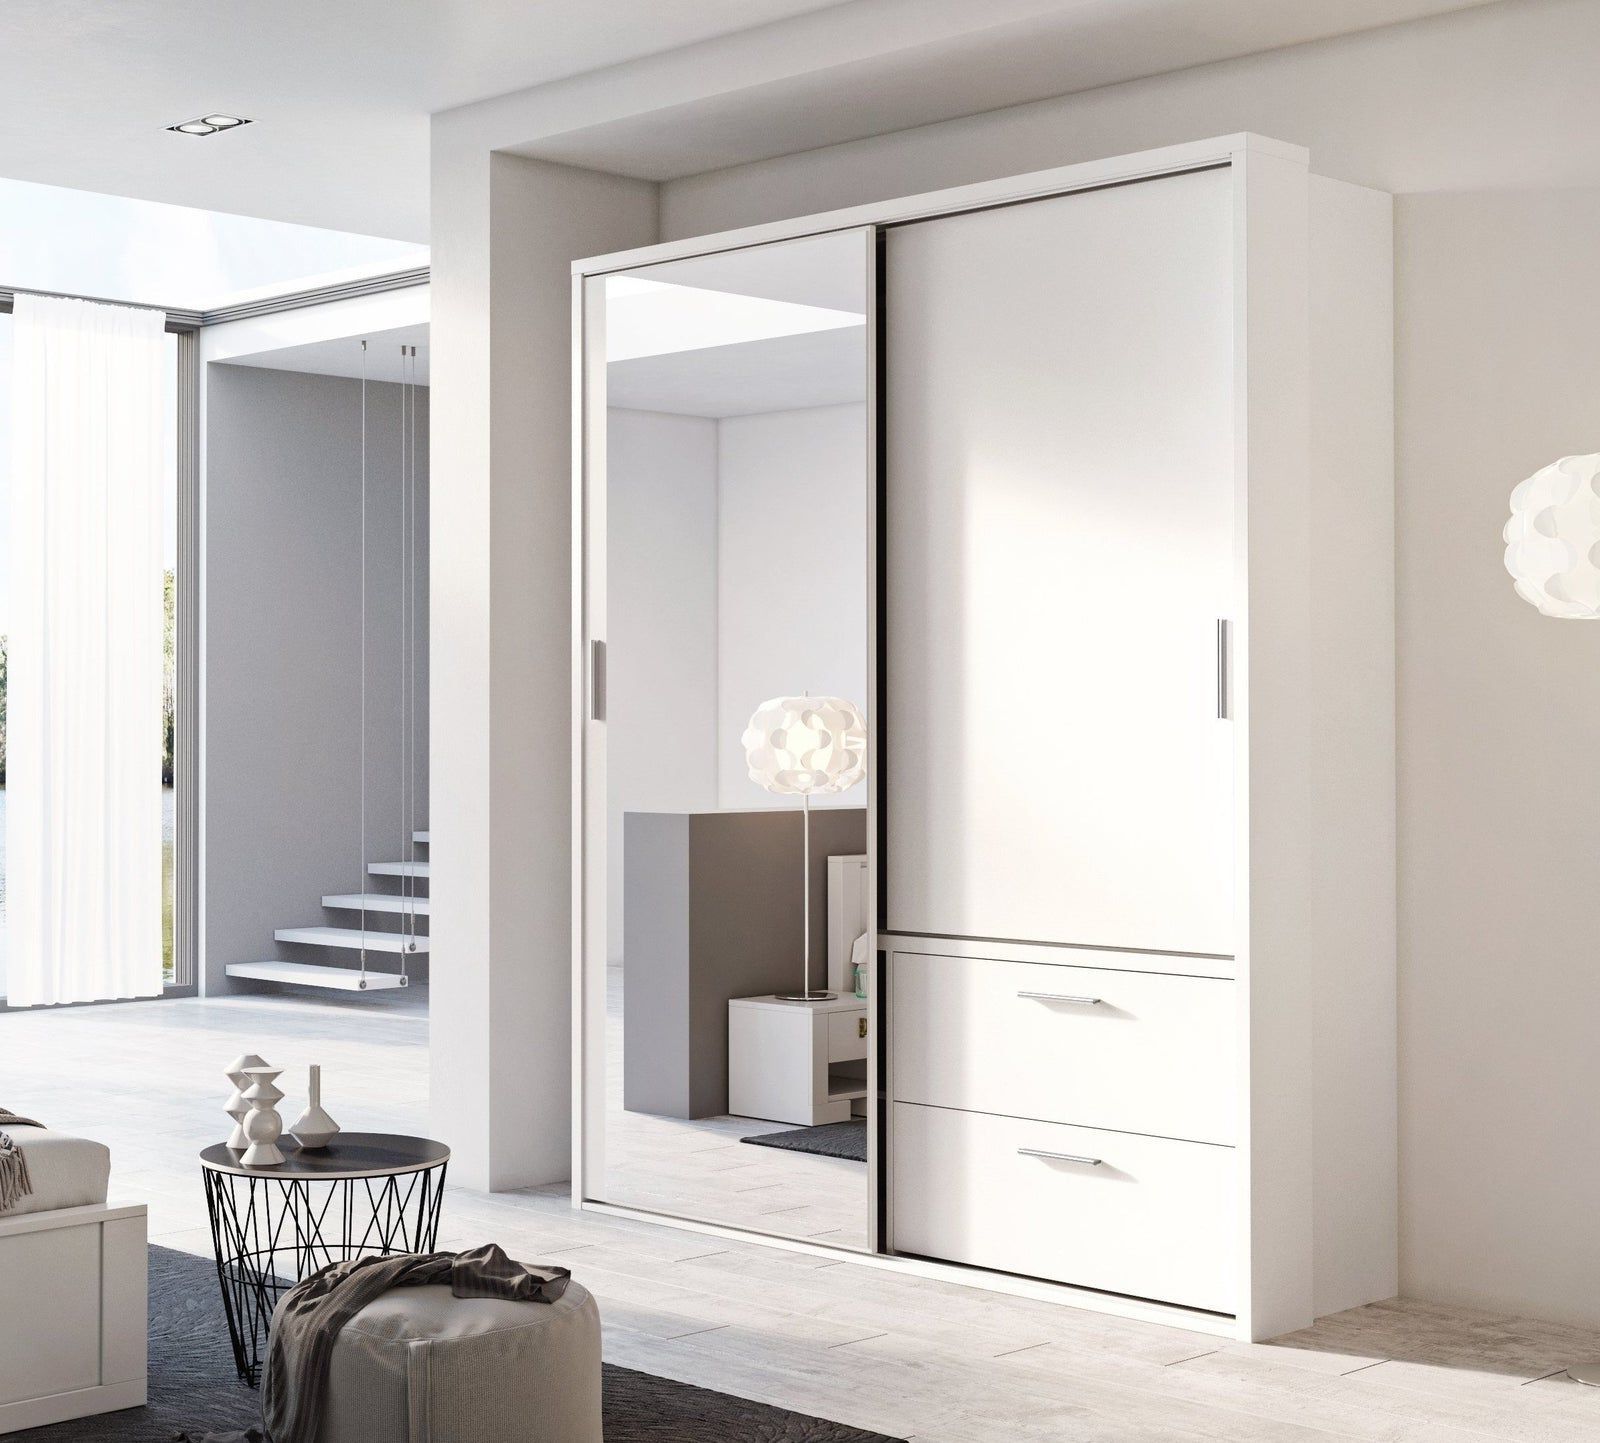 Vision Sliding Wardrobe With Drawers In White | 2 Door – 180cm Inside White 2 Door Wardrobes With Drawers (View 15 of 20)